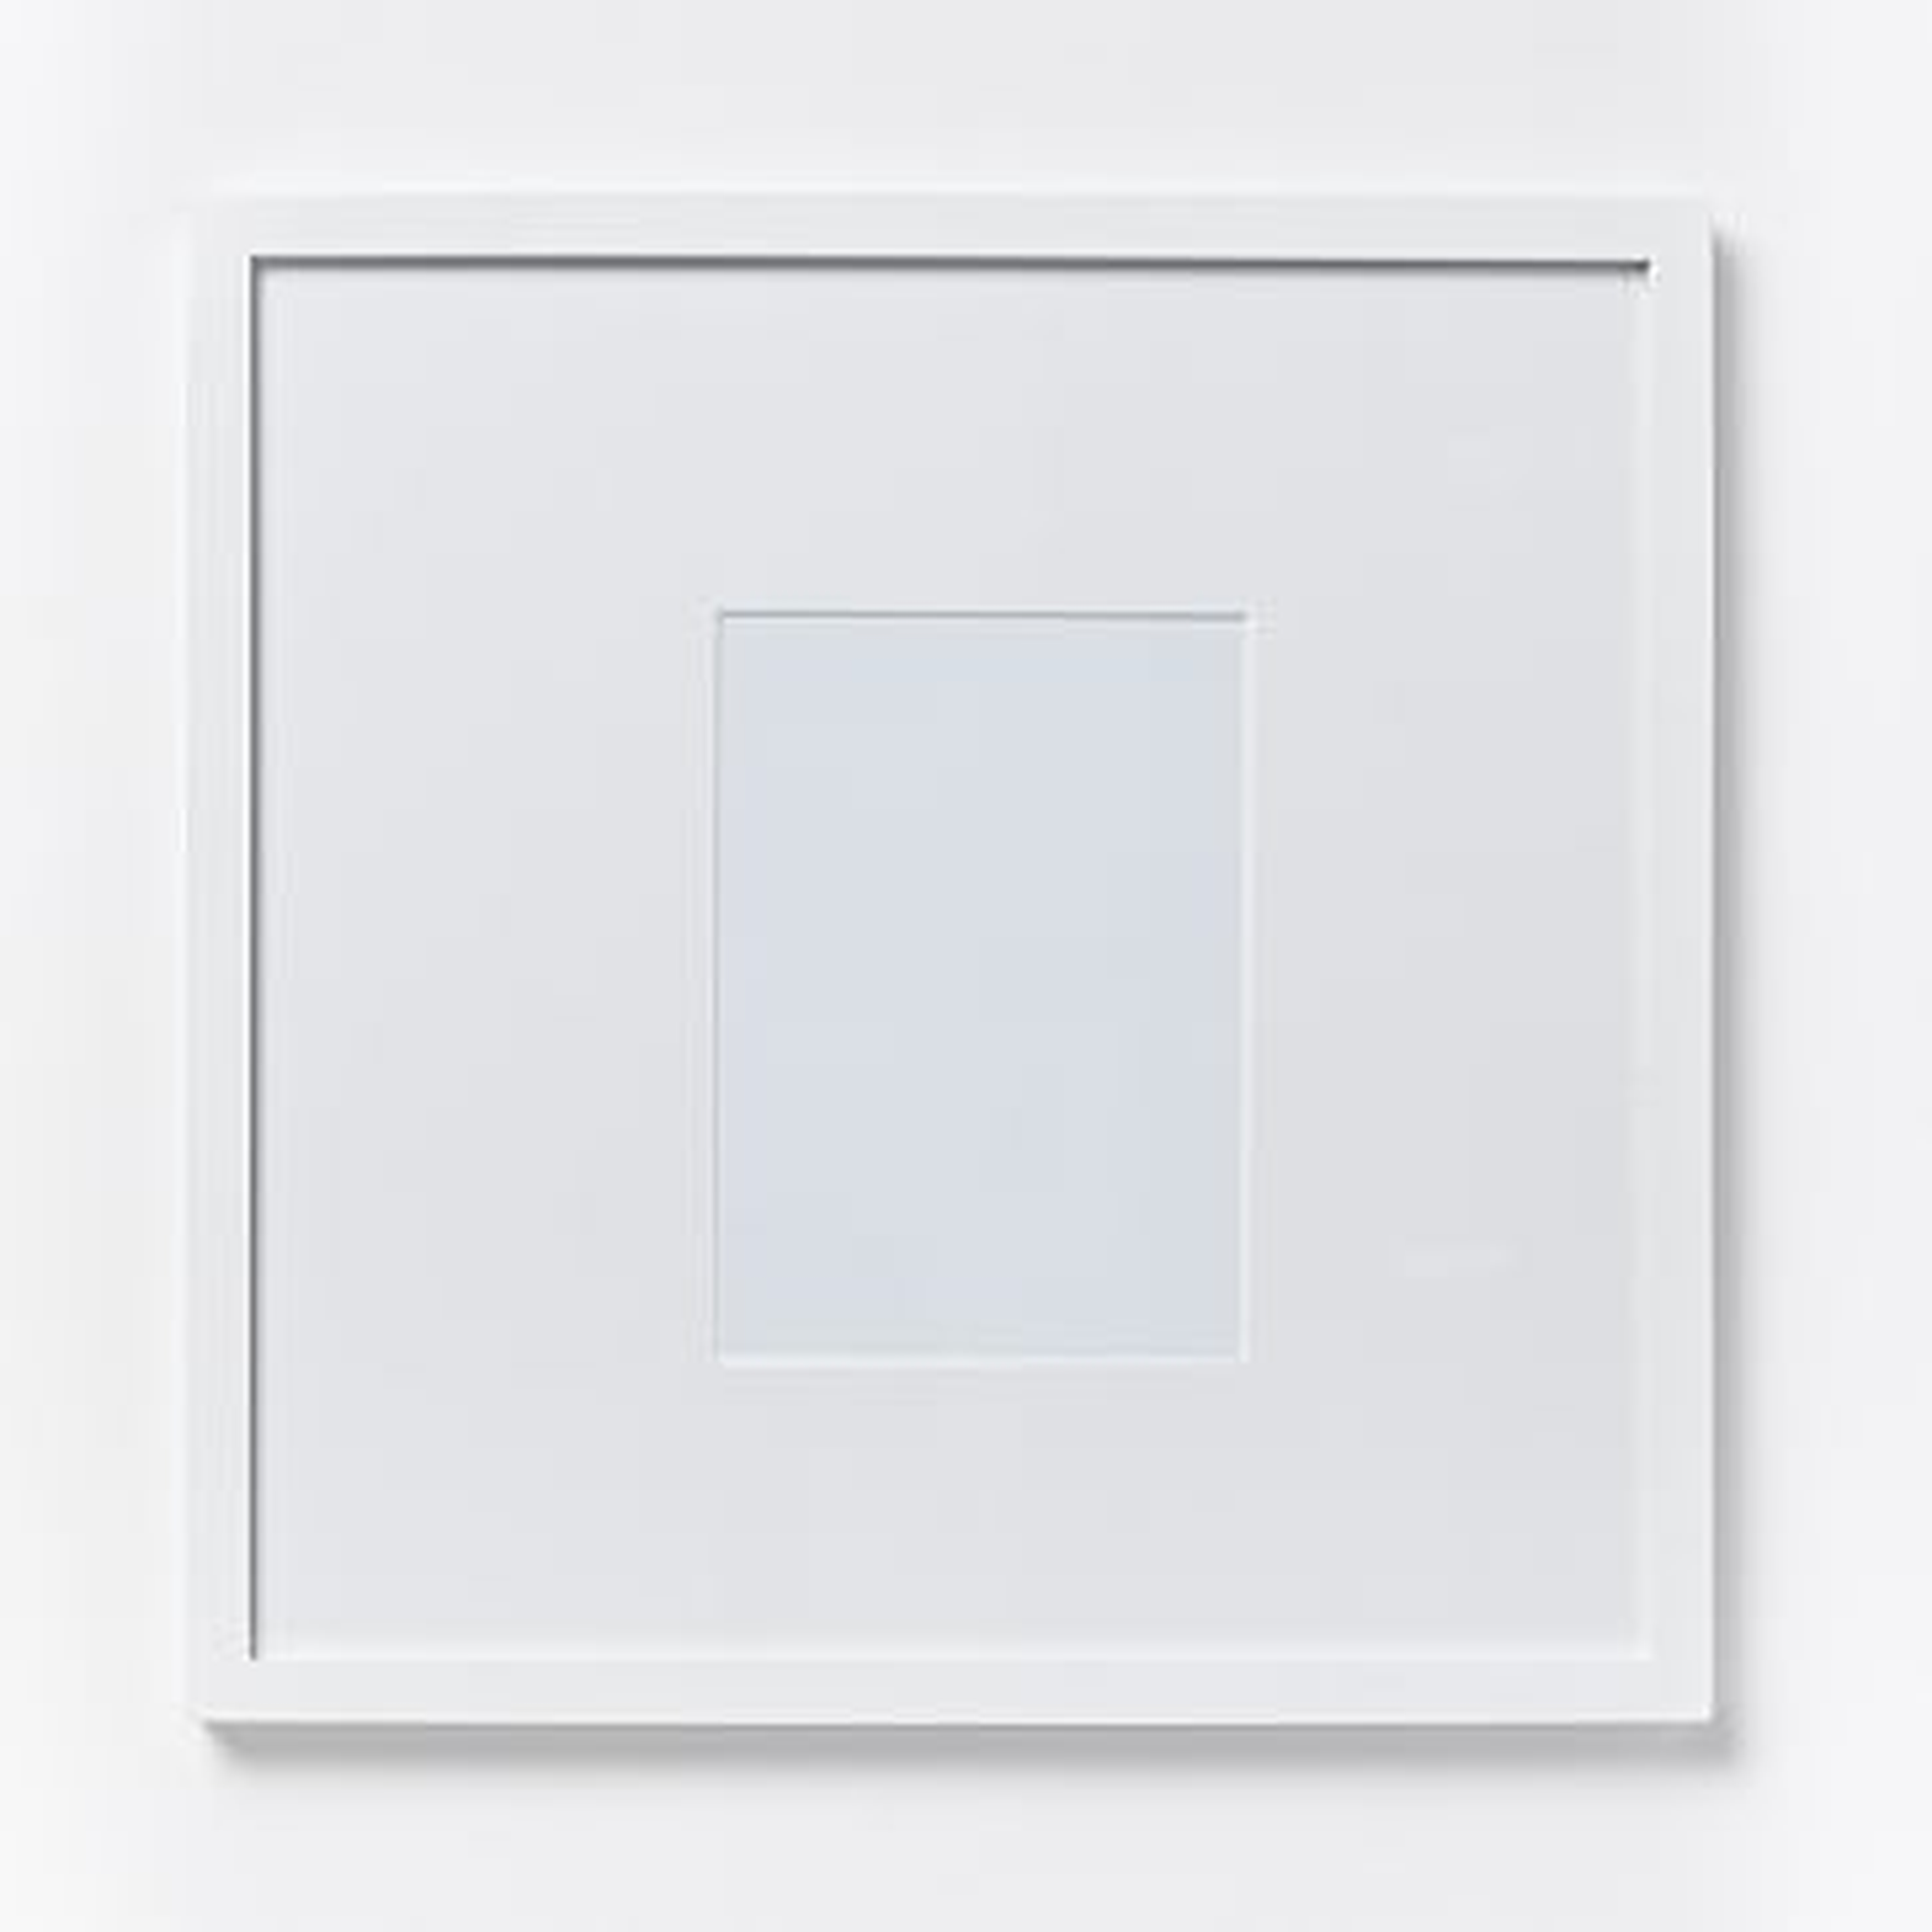 Gallery Frame, 4"x 6" (17" x 17" without mat), White Lacquer - West Elm